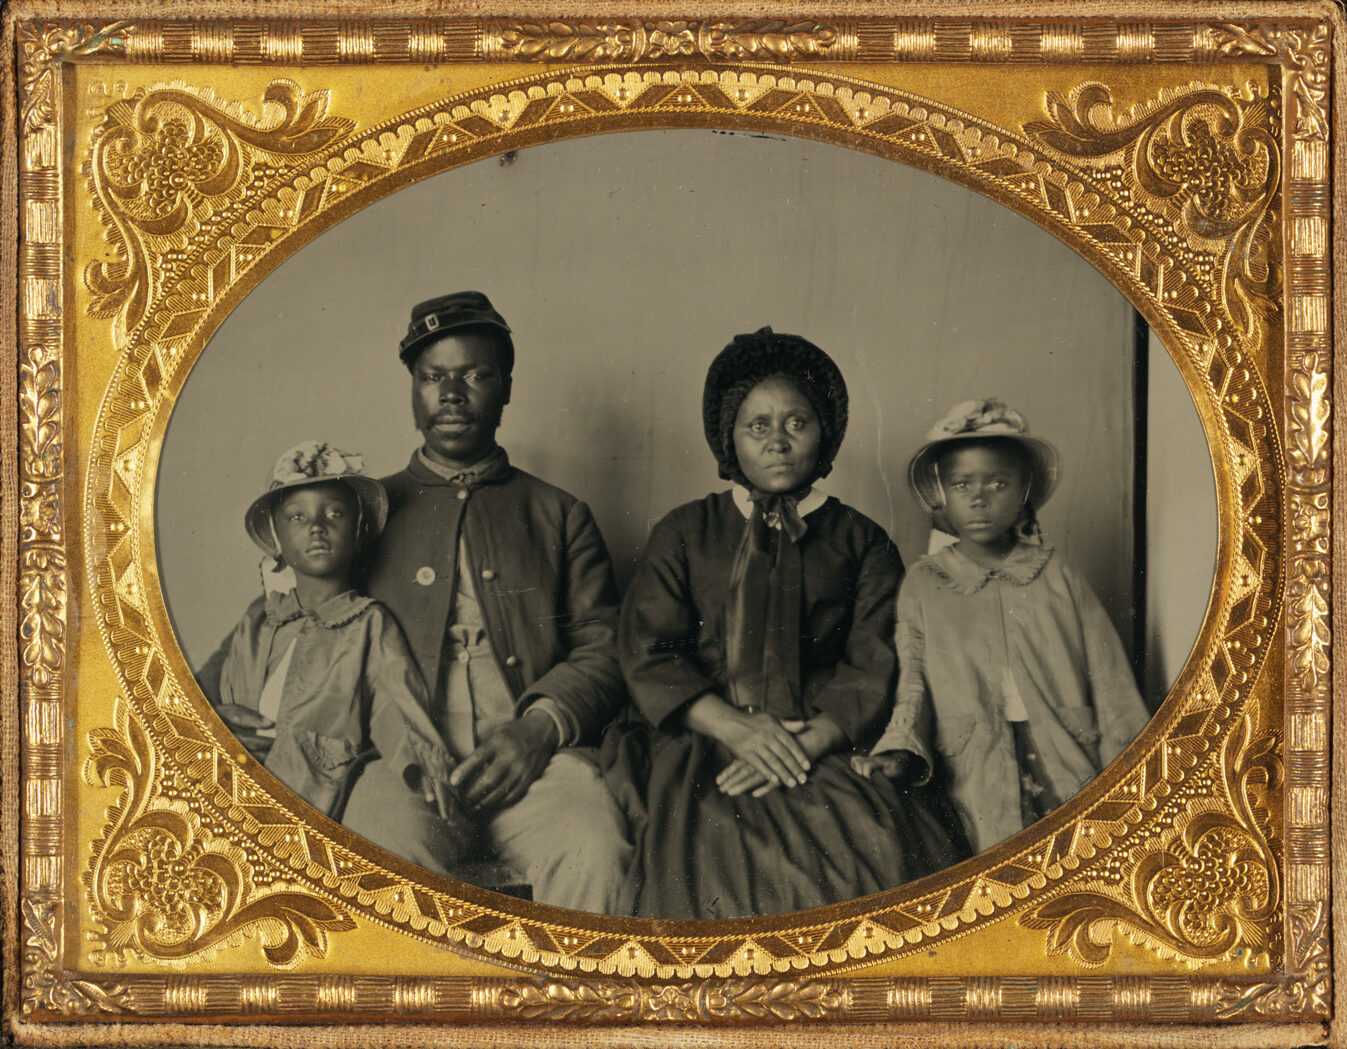 Photograph of Unidentified African American Soldier with His Family